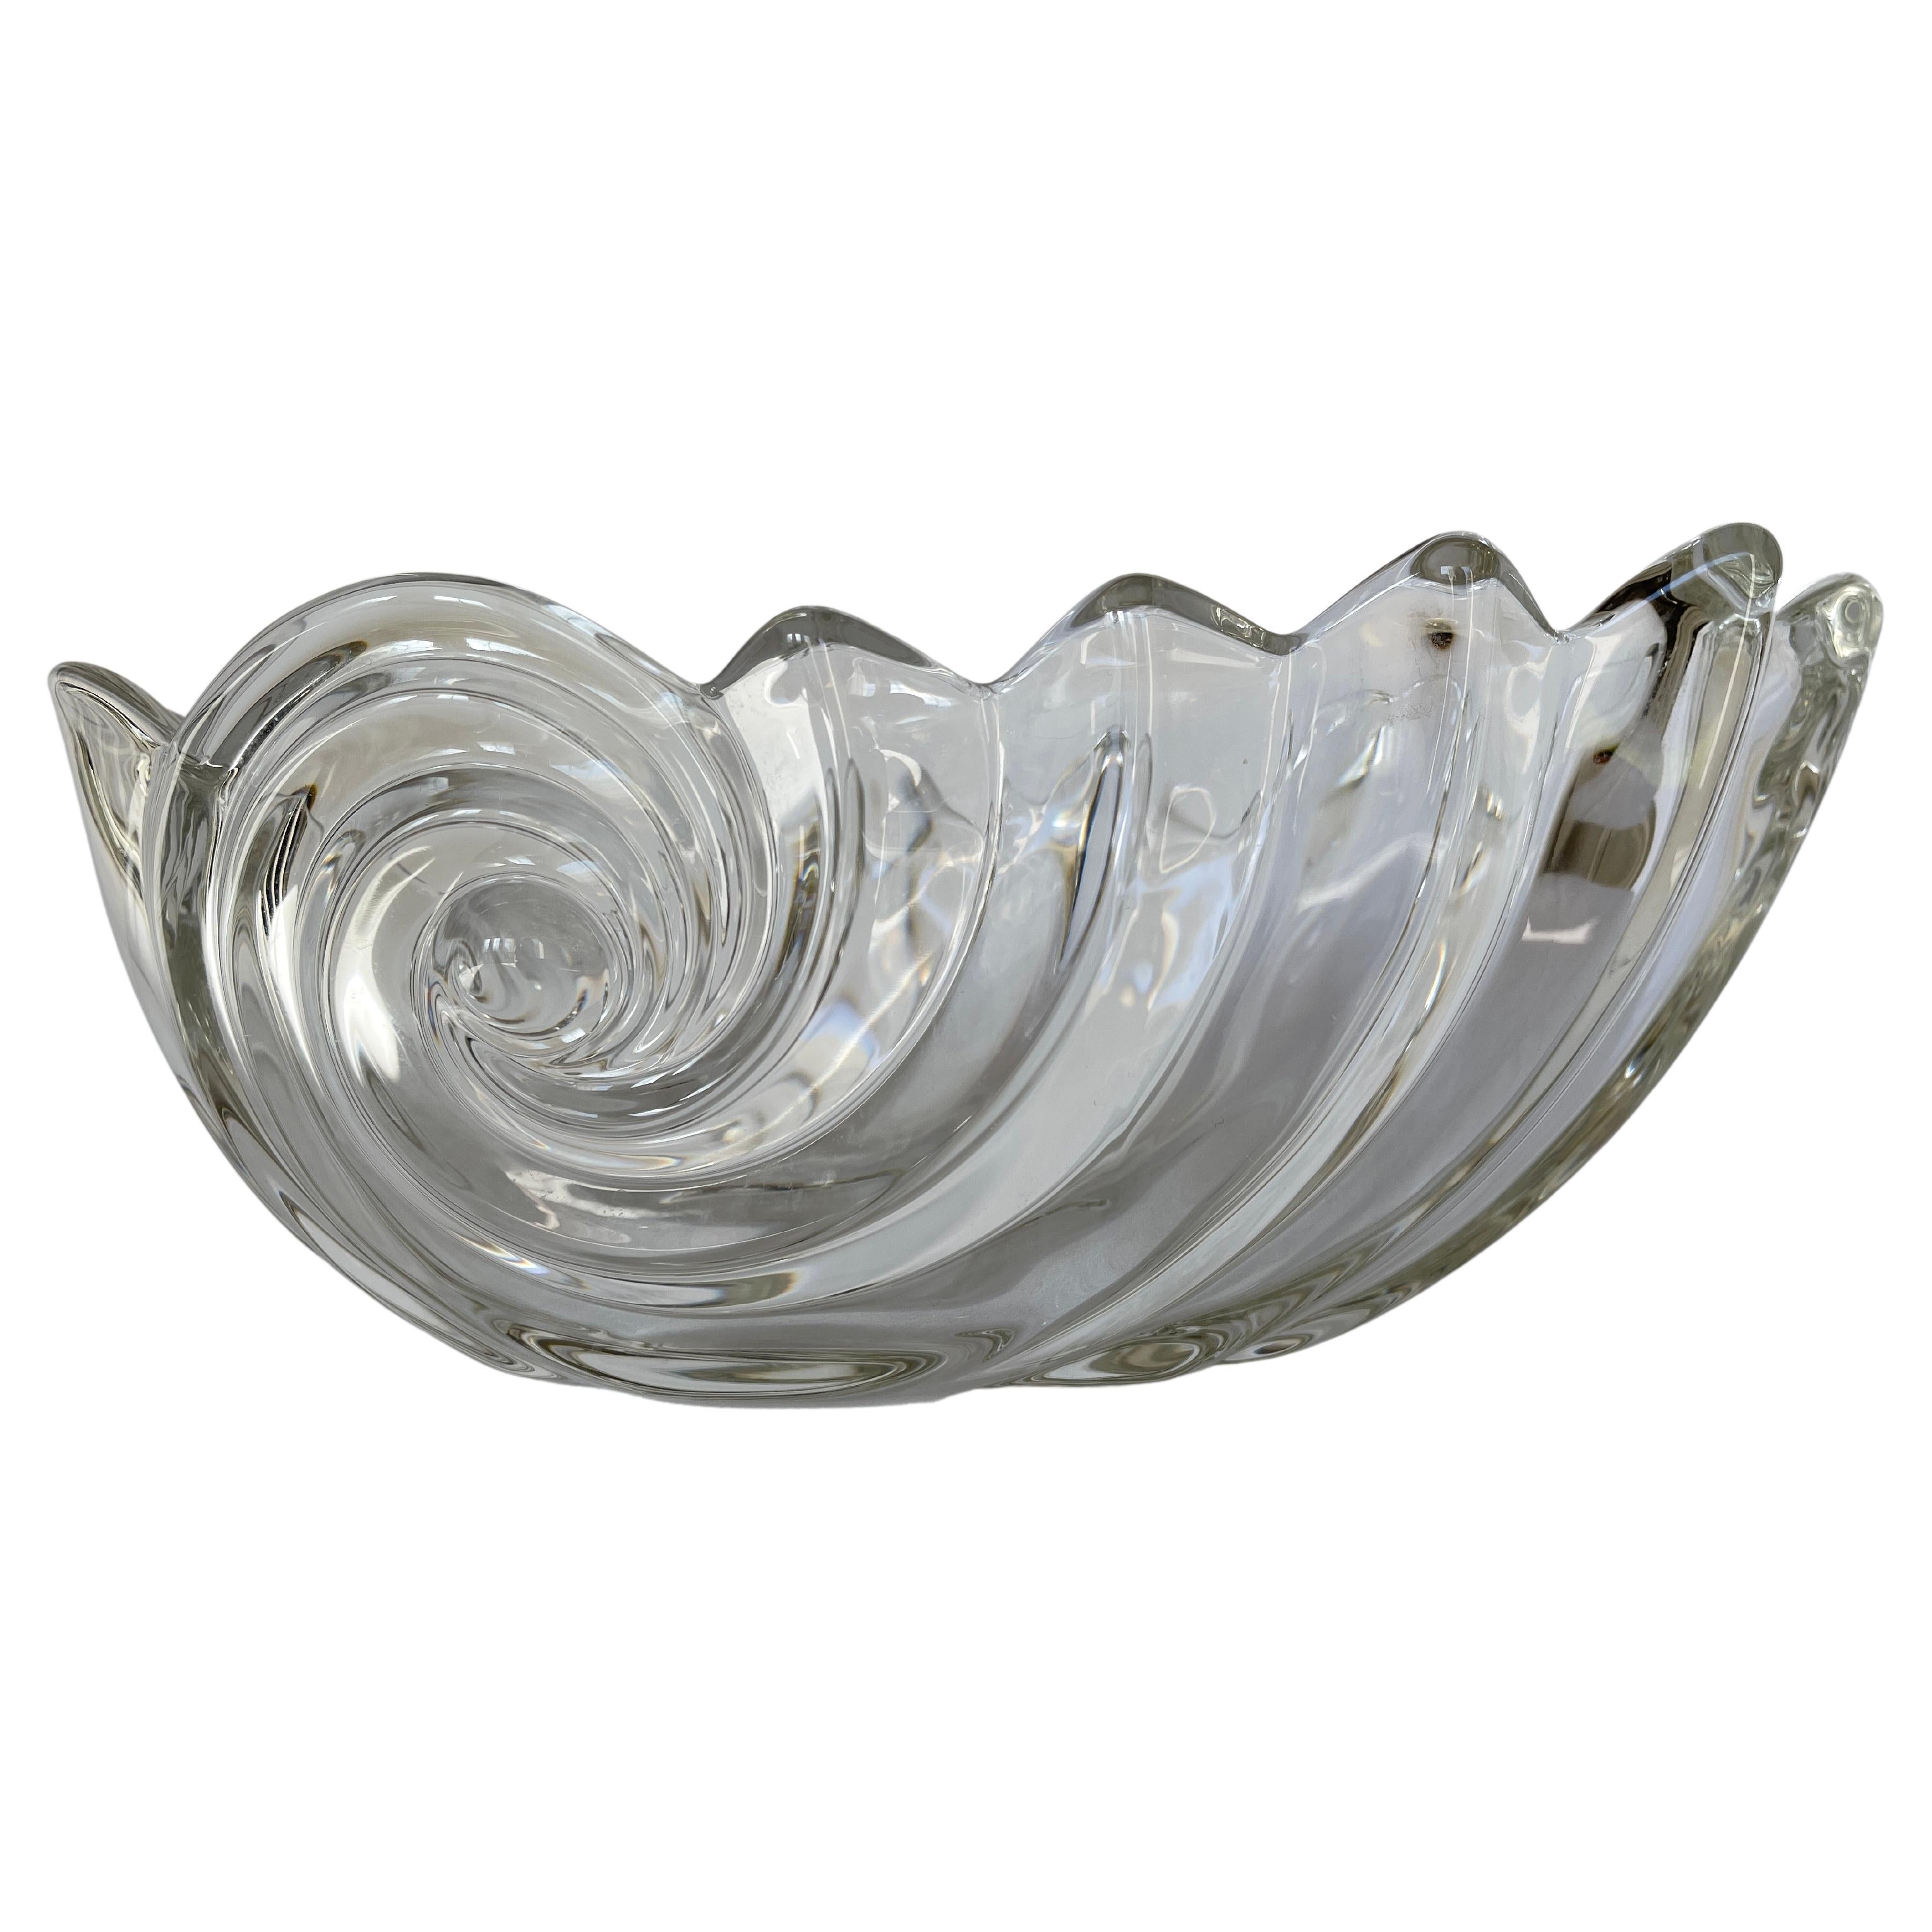 Late 20th Century German Crystal Nautilus Shell Centrepiece Serving Bowl